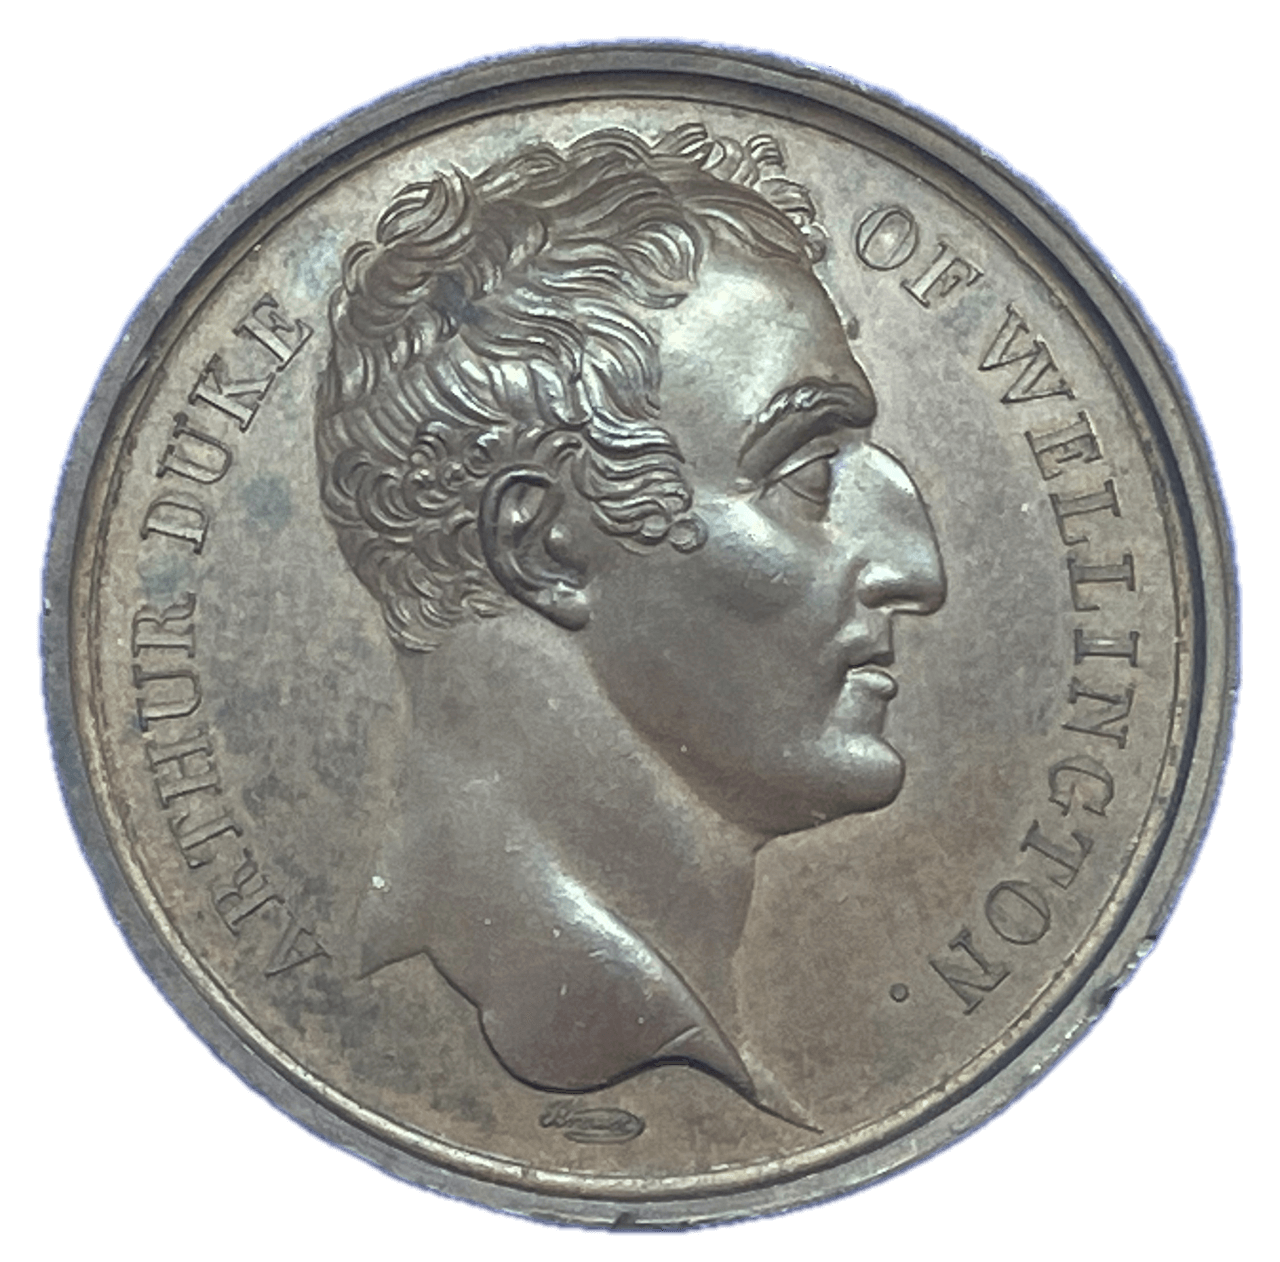 1815 The Duke of Wellington and the entry of the British Army into Paris Historical Medallion by N G A Brenet